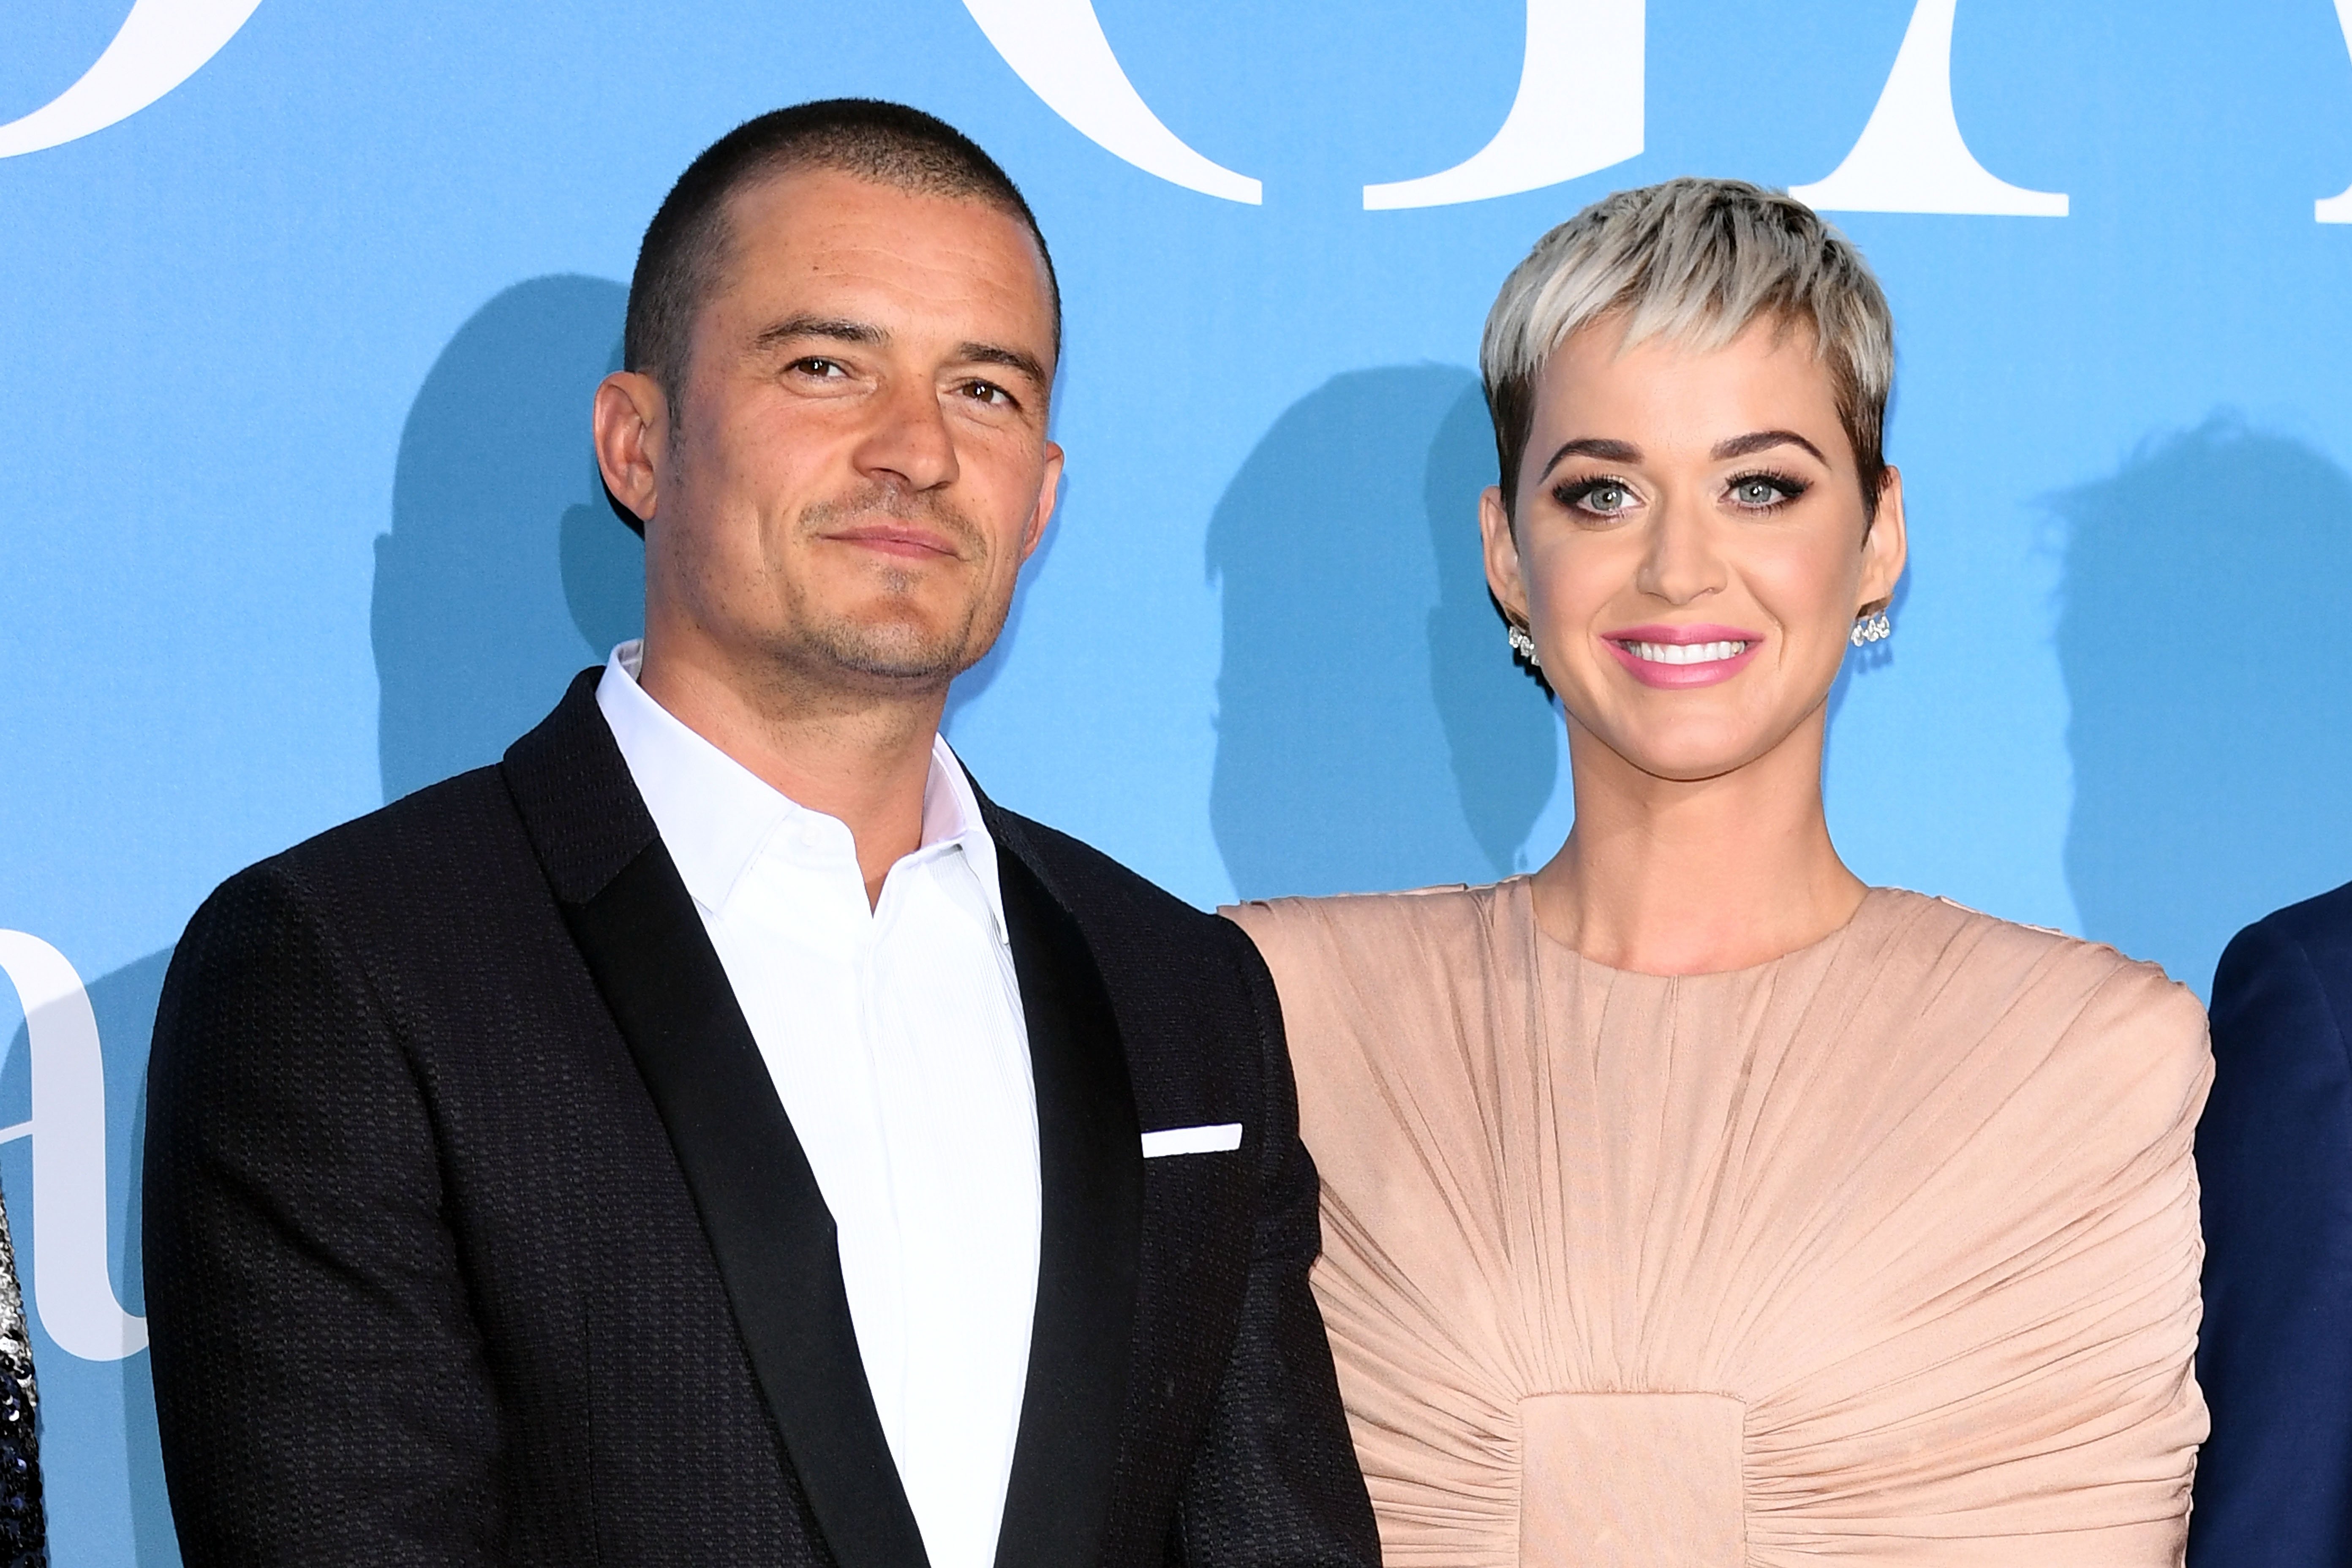 Katy Perry and fiance Orlando Bloom. | Photo: Getty Images